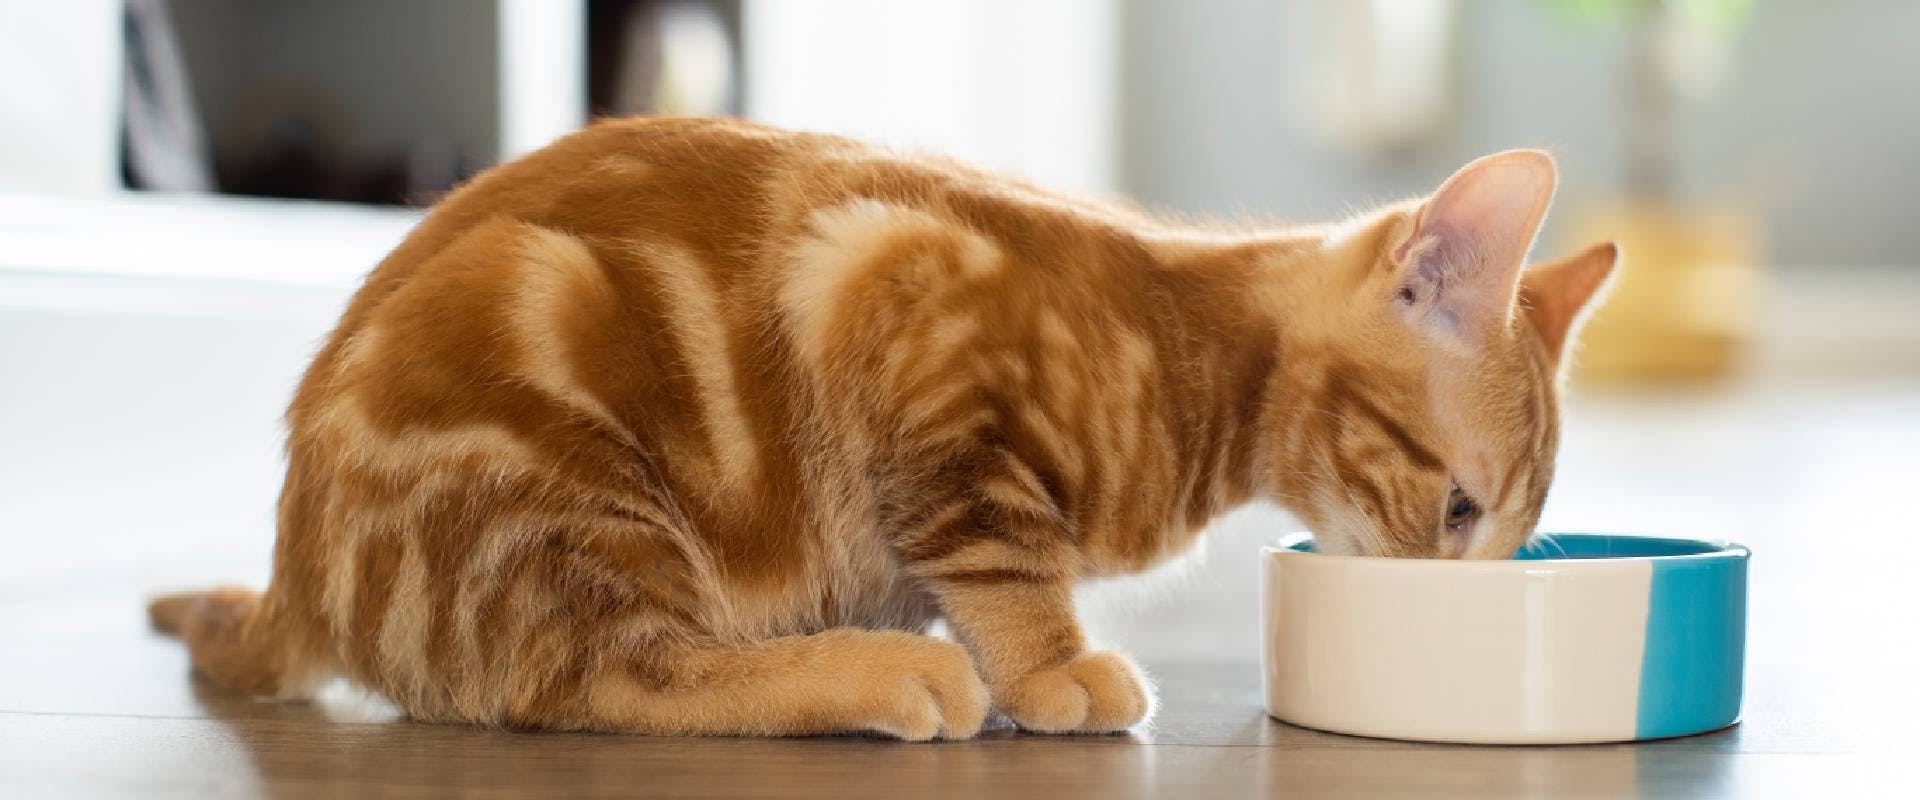 ginger cat eating from a bowl